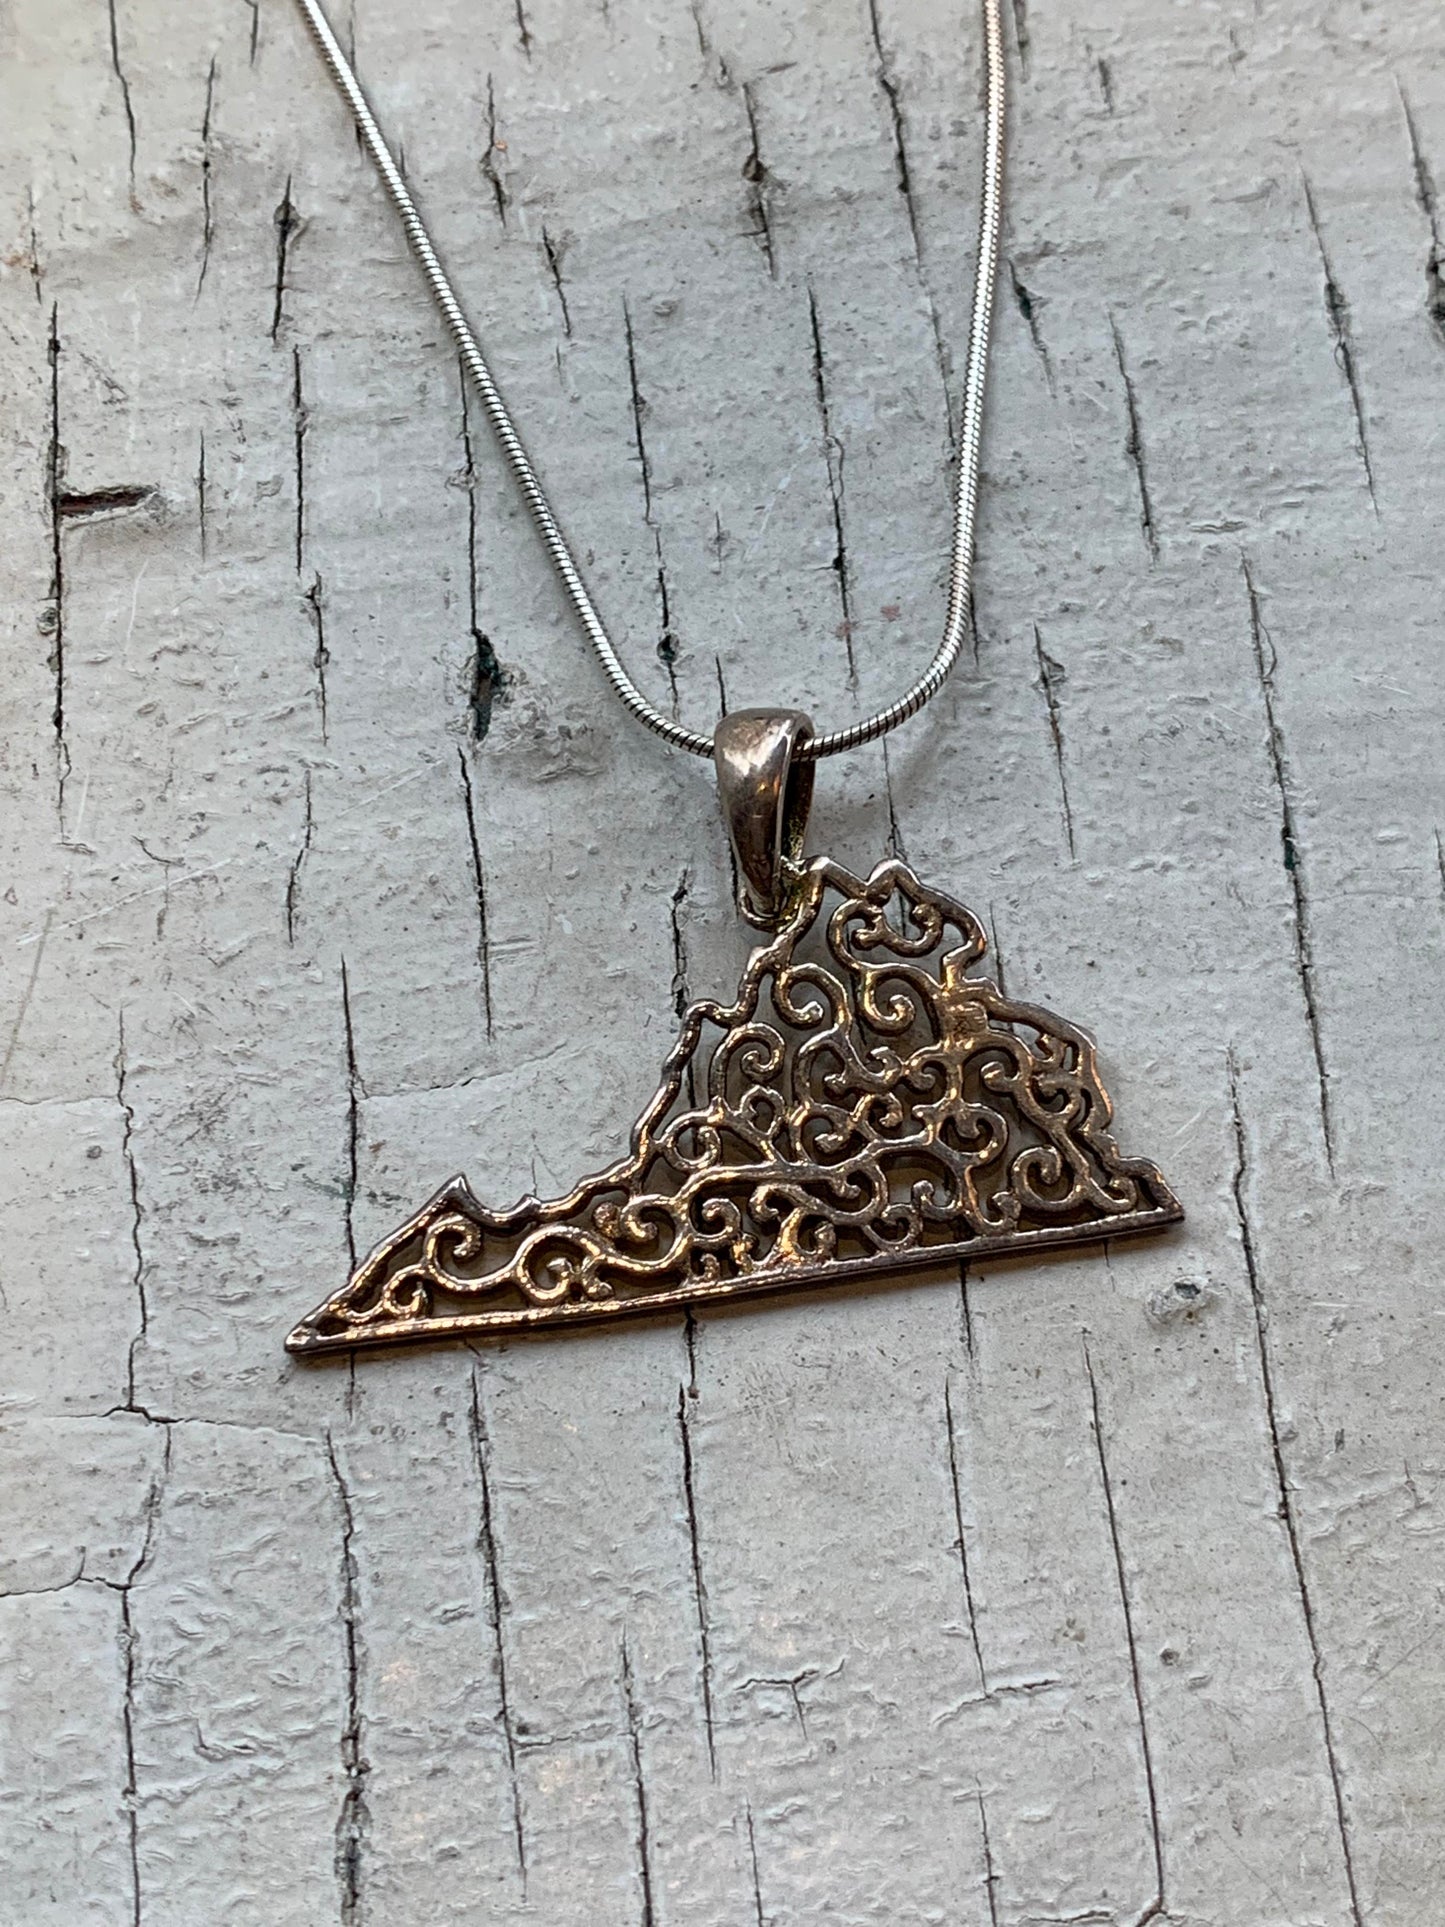 Virginia State Necklace